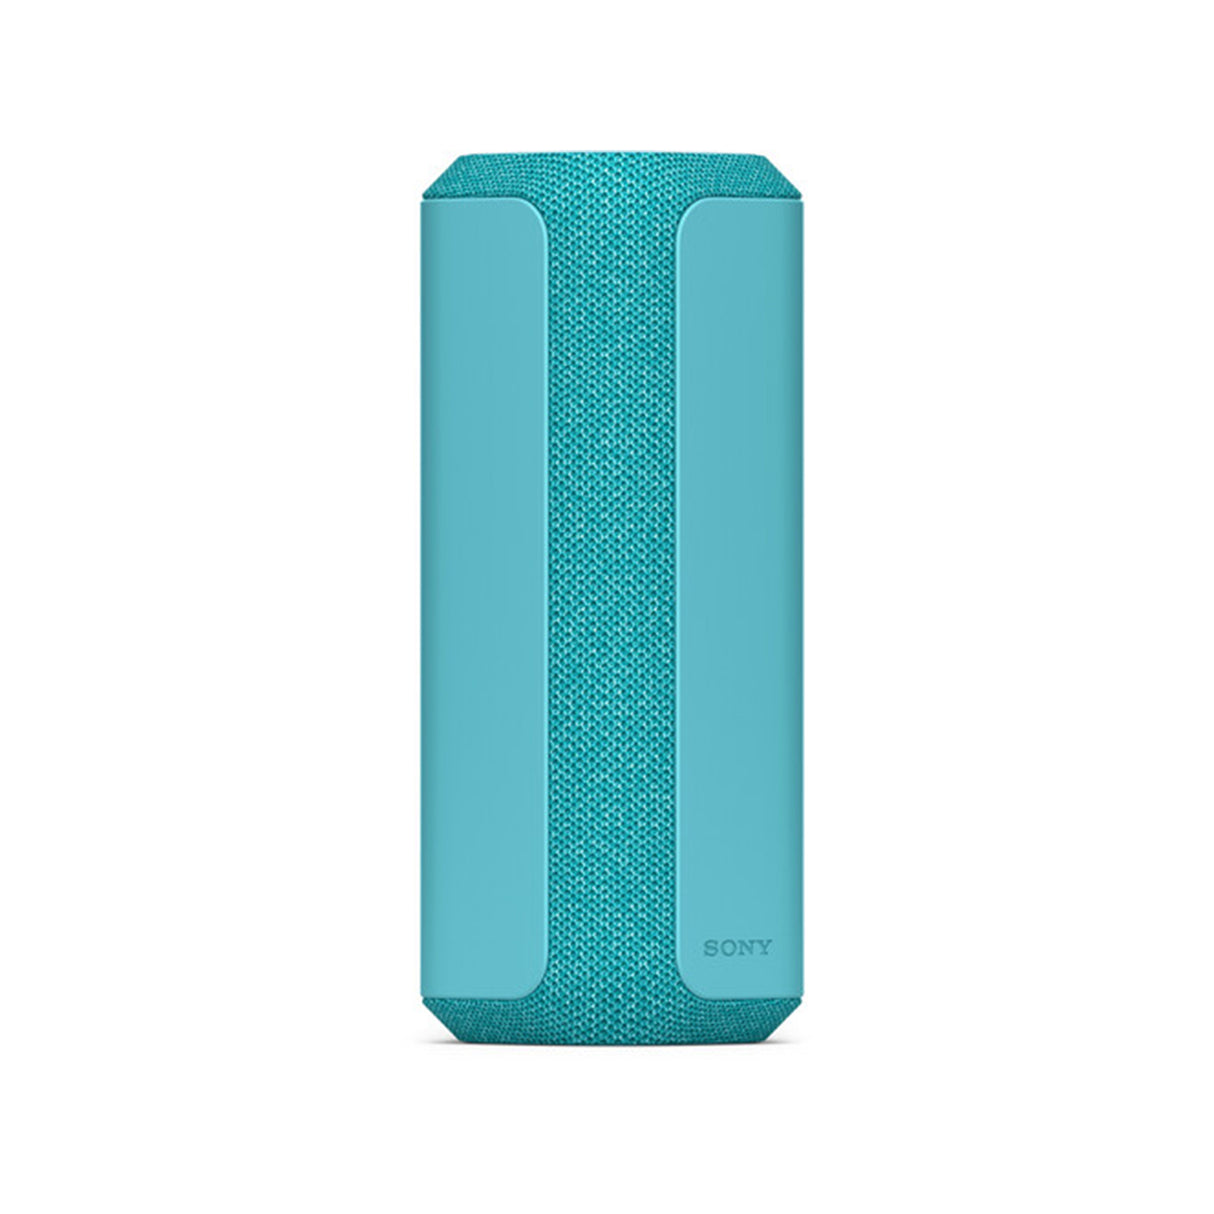 Sony SRS-XE200 - Wirless Ultra Portable Bluetooth Speaker with 16 Hour Battery Backup (Blue)